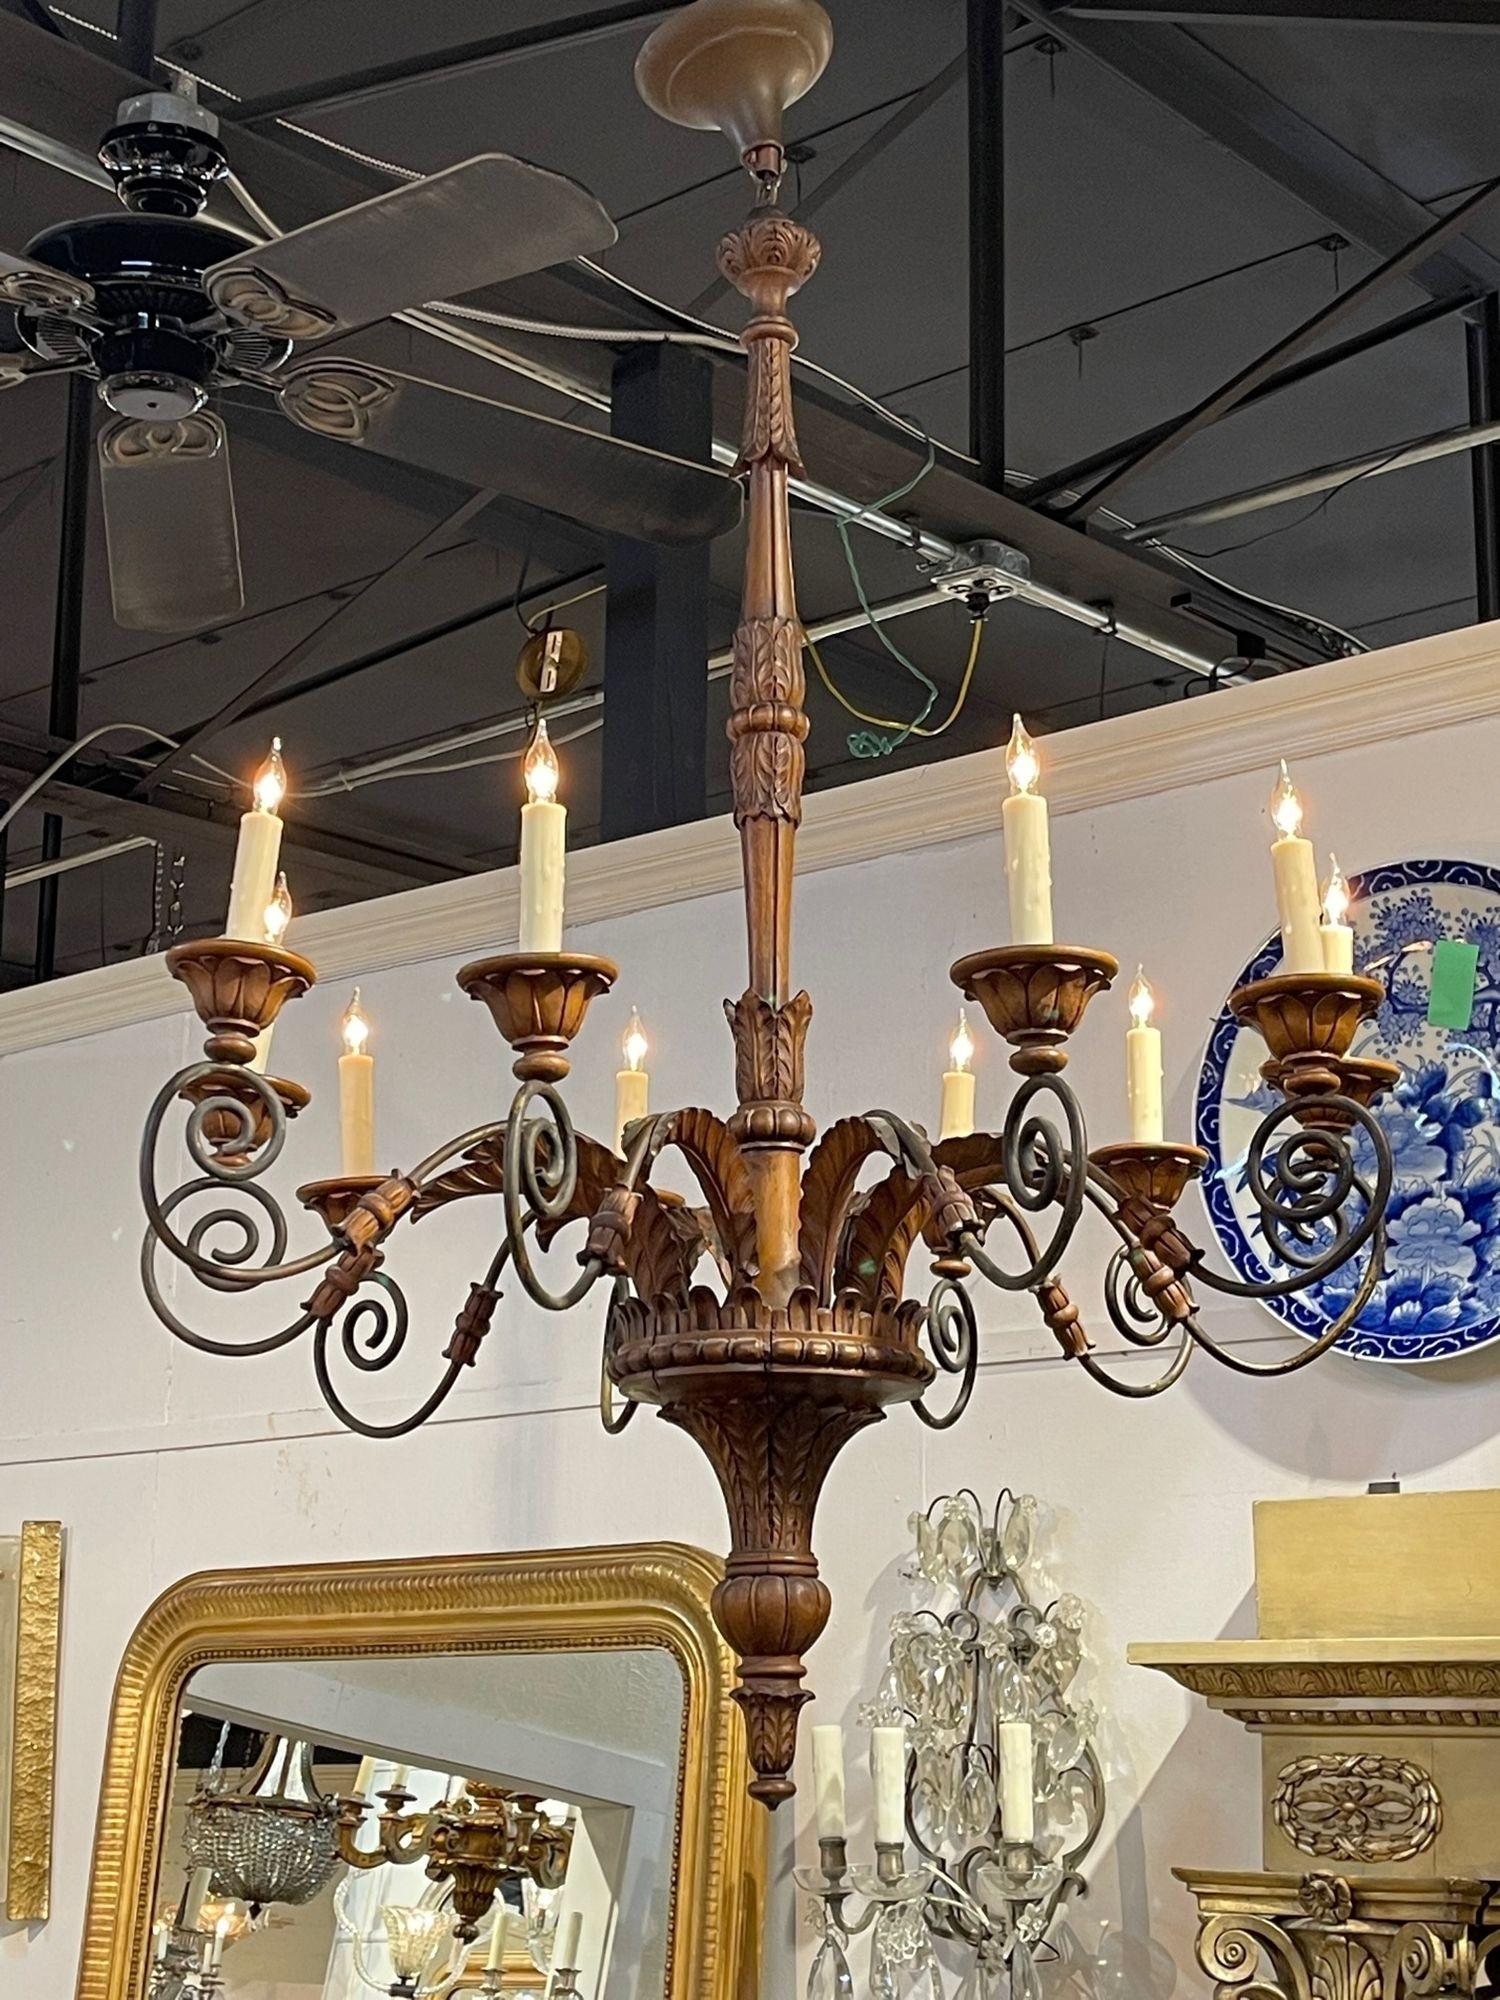 Beautiful 19th century French carved walnut and iron 10 light chandelier. Very fine intricate carving and nice patina. Makes an elegant statement!